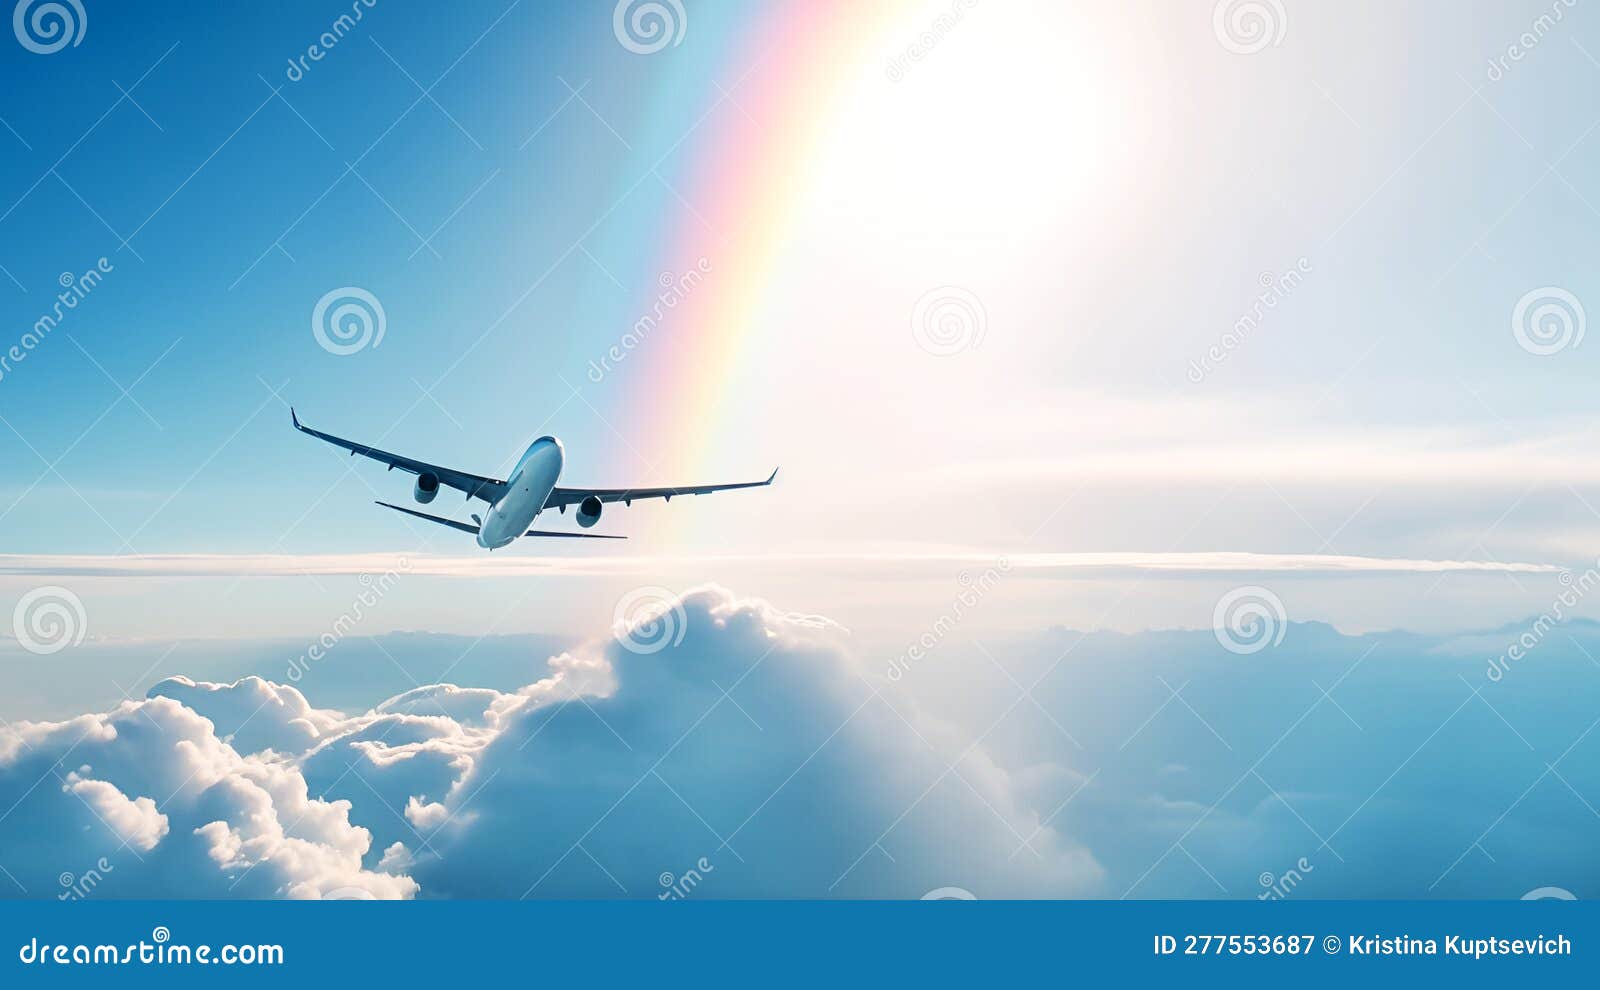 airplane flying above amazing clouds in clear blue sky with rainbow and sun raies